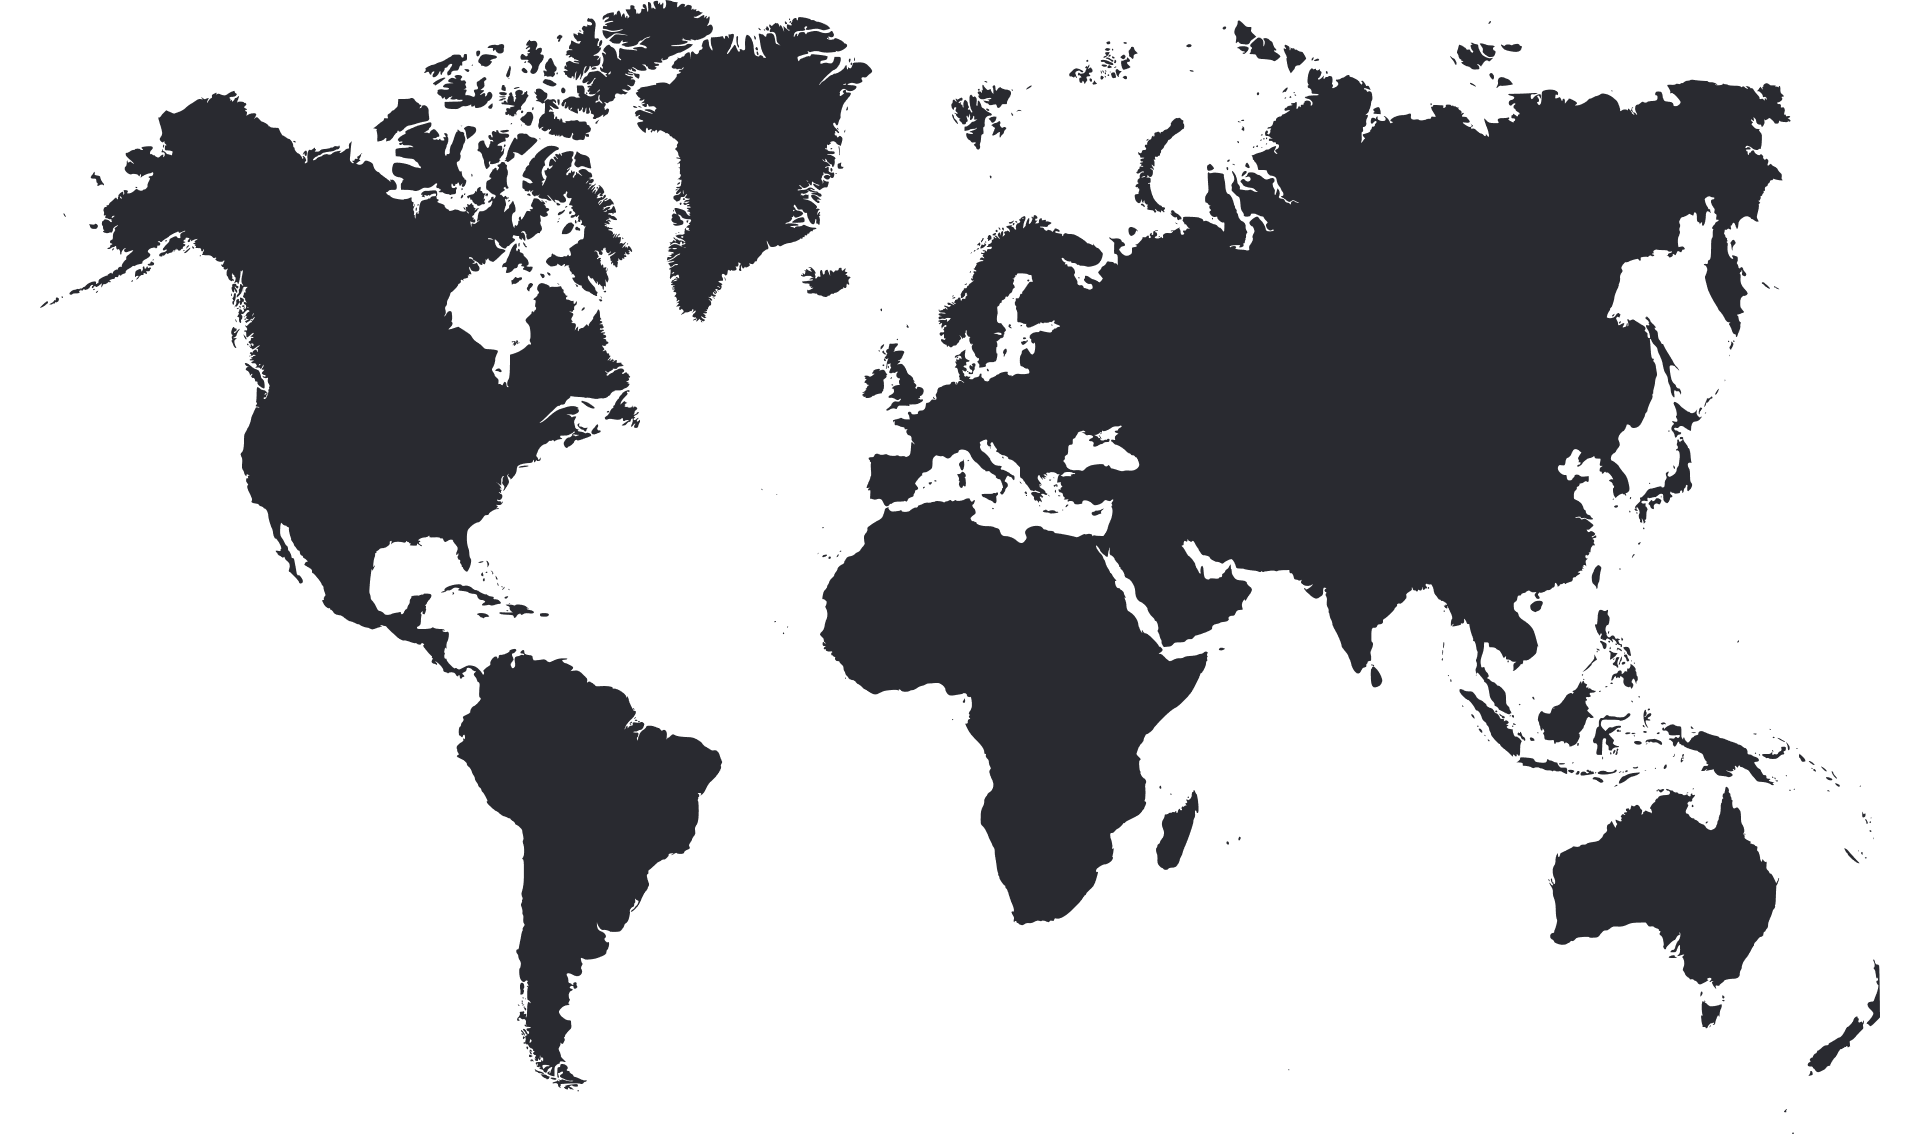 The outline of Earth continents